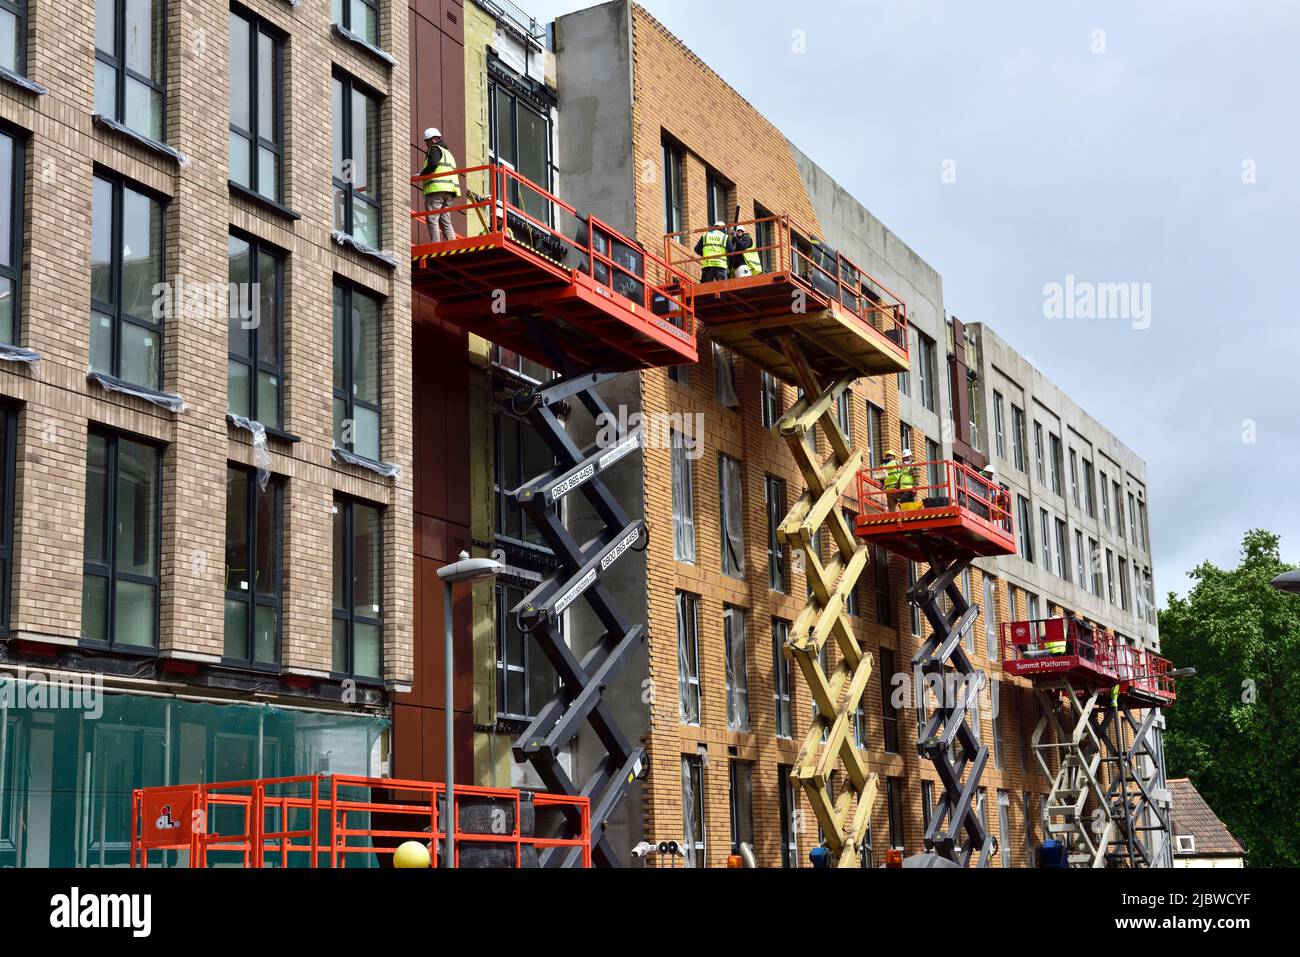 Walls of building which have external insulation board having brick slips cladding to give appearance of a brick wall, UK, student accommodation Stock Photo